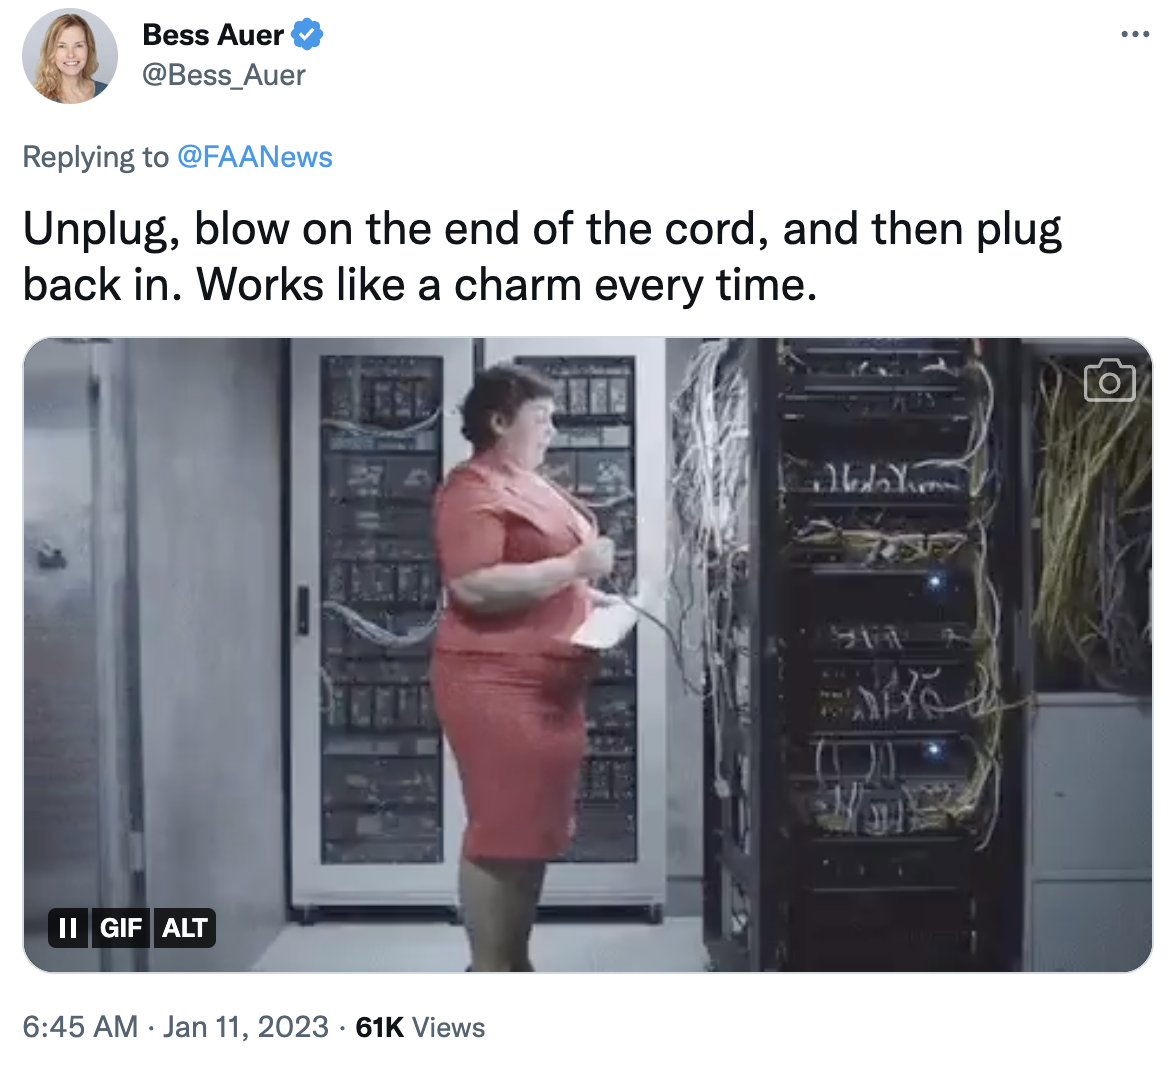 major appliance - Bess Auer Unplug, blow on the end of the cord, and then plug back in. Works a charm every time. Ii Gif Alt 61K Views Away 914 www